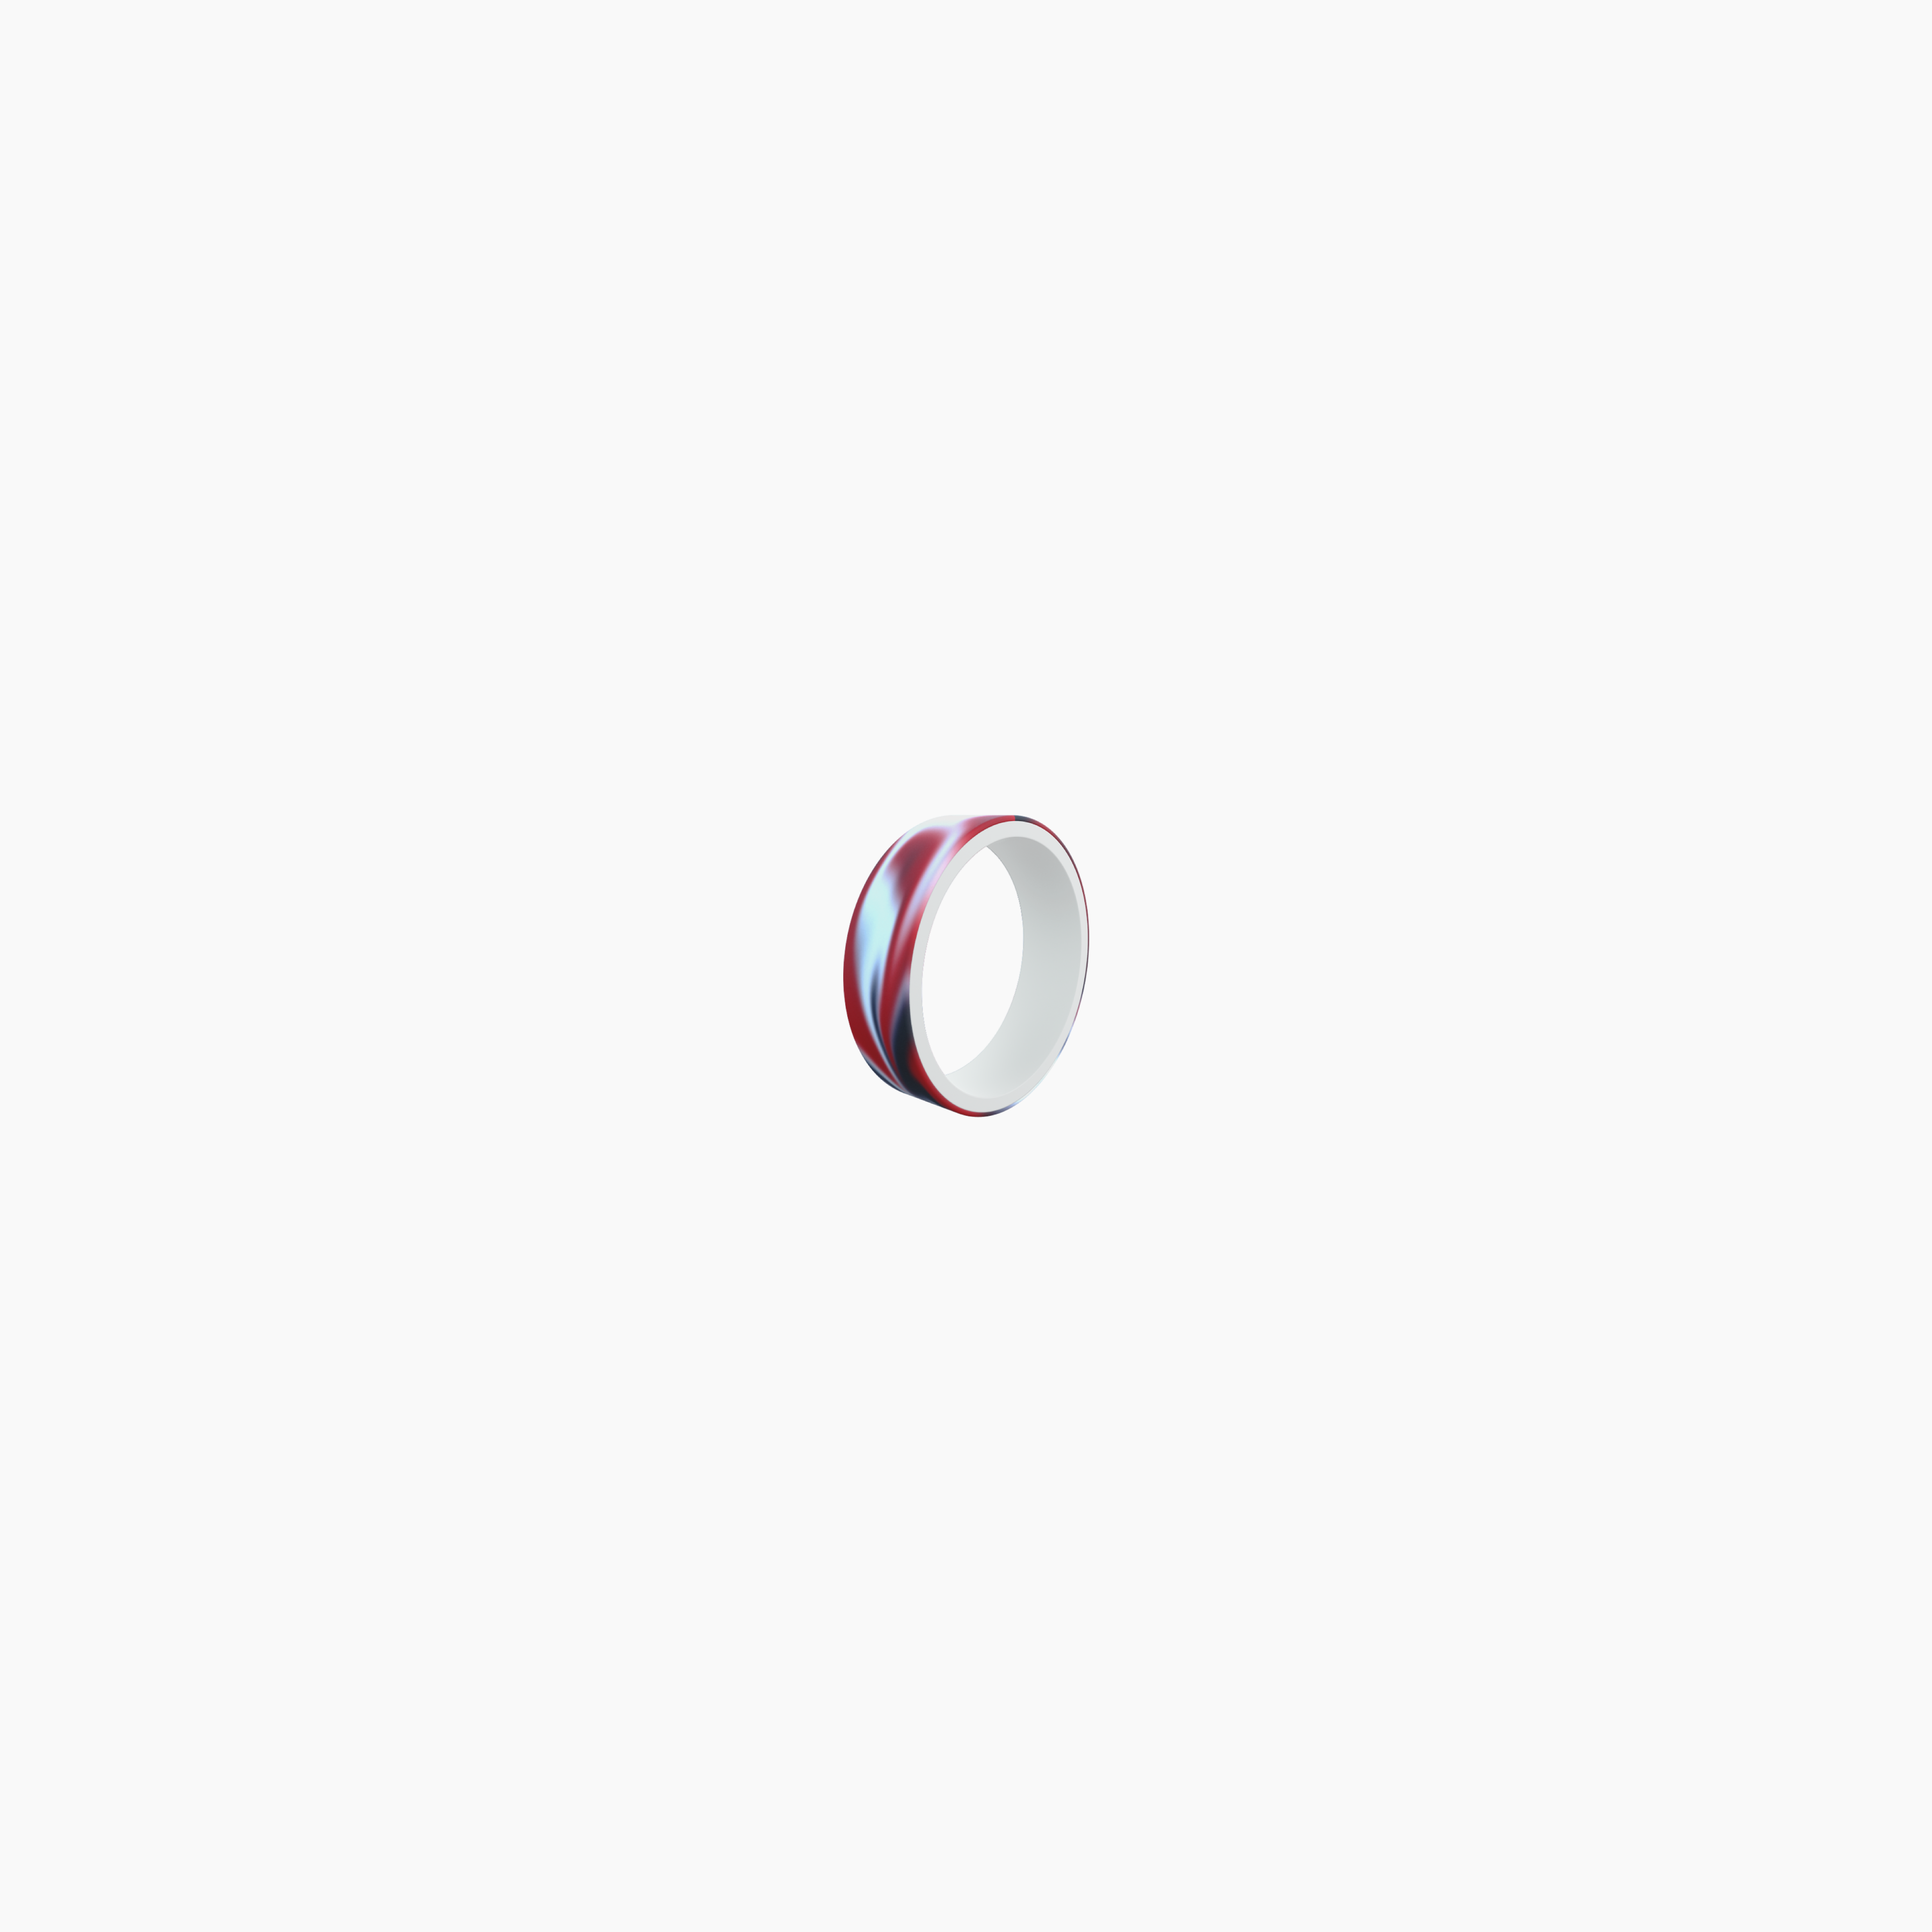 Women's Switch Reversible Silicone Ring - Red White and Blue Marble